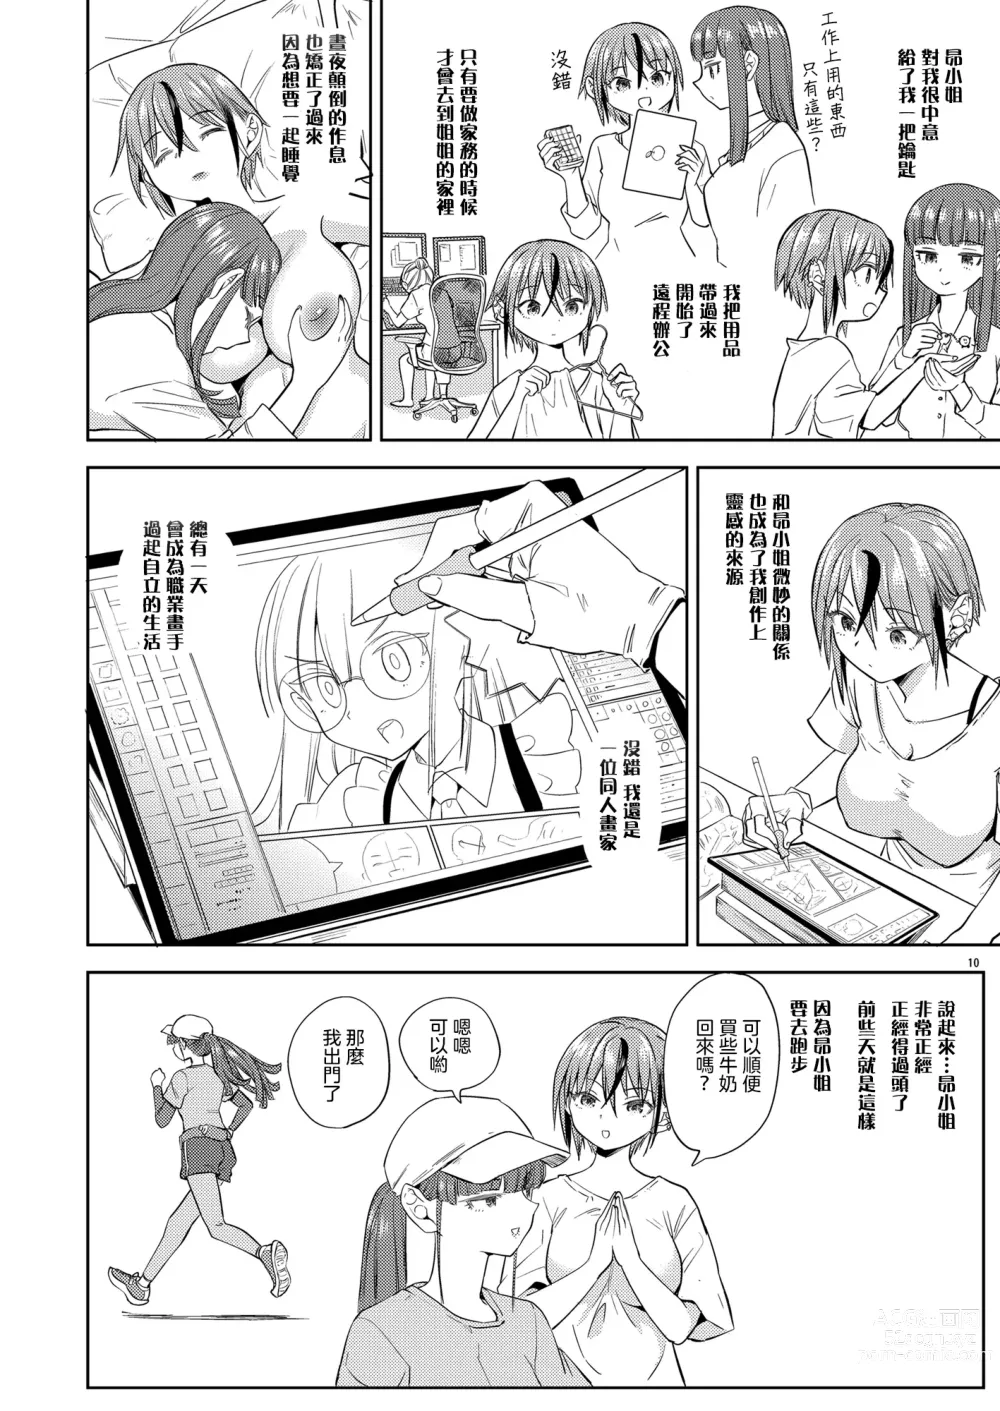 Page 12 of doujinshi 當我們全裸相擁之時